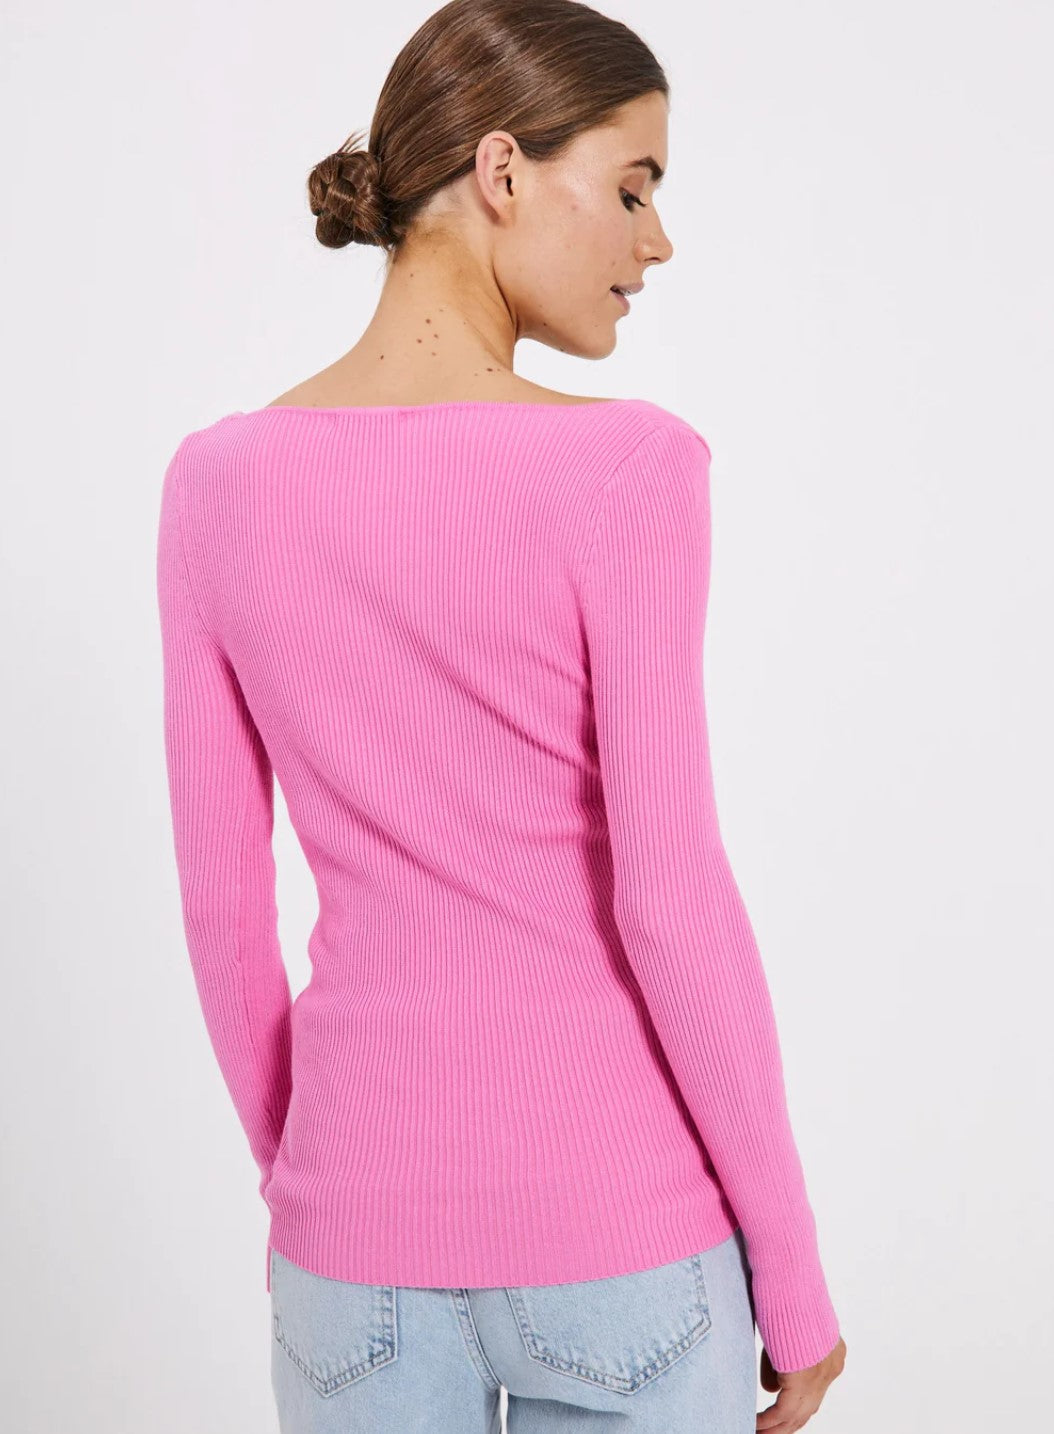 Sherry heart knit top  Bright Pink